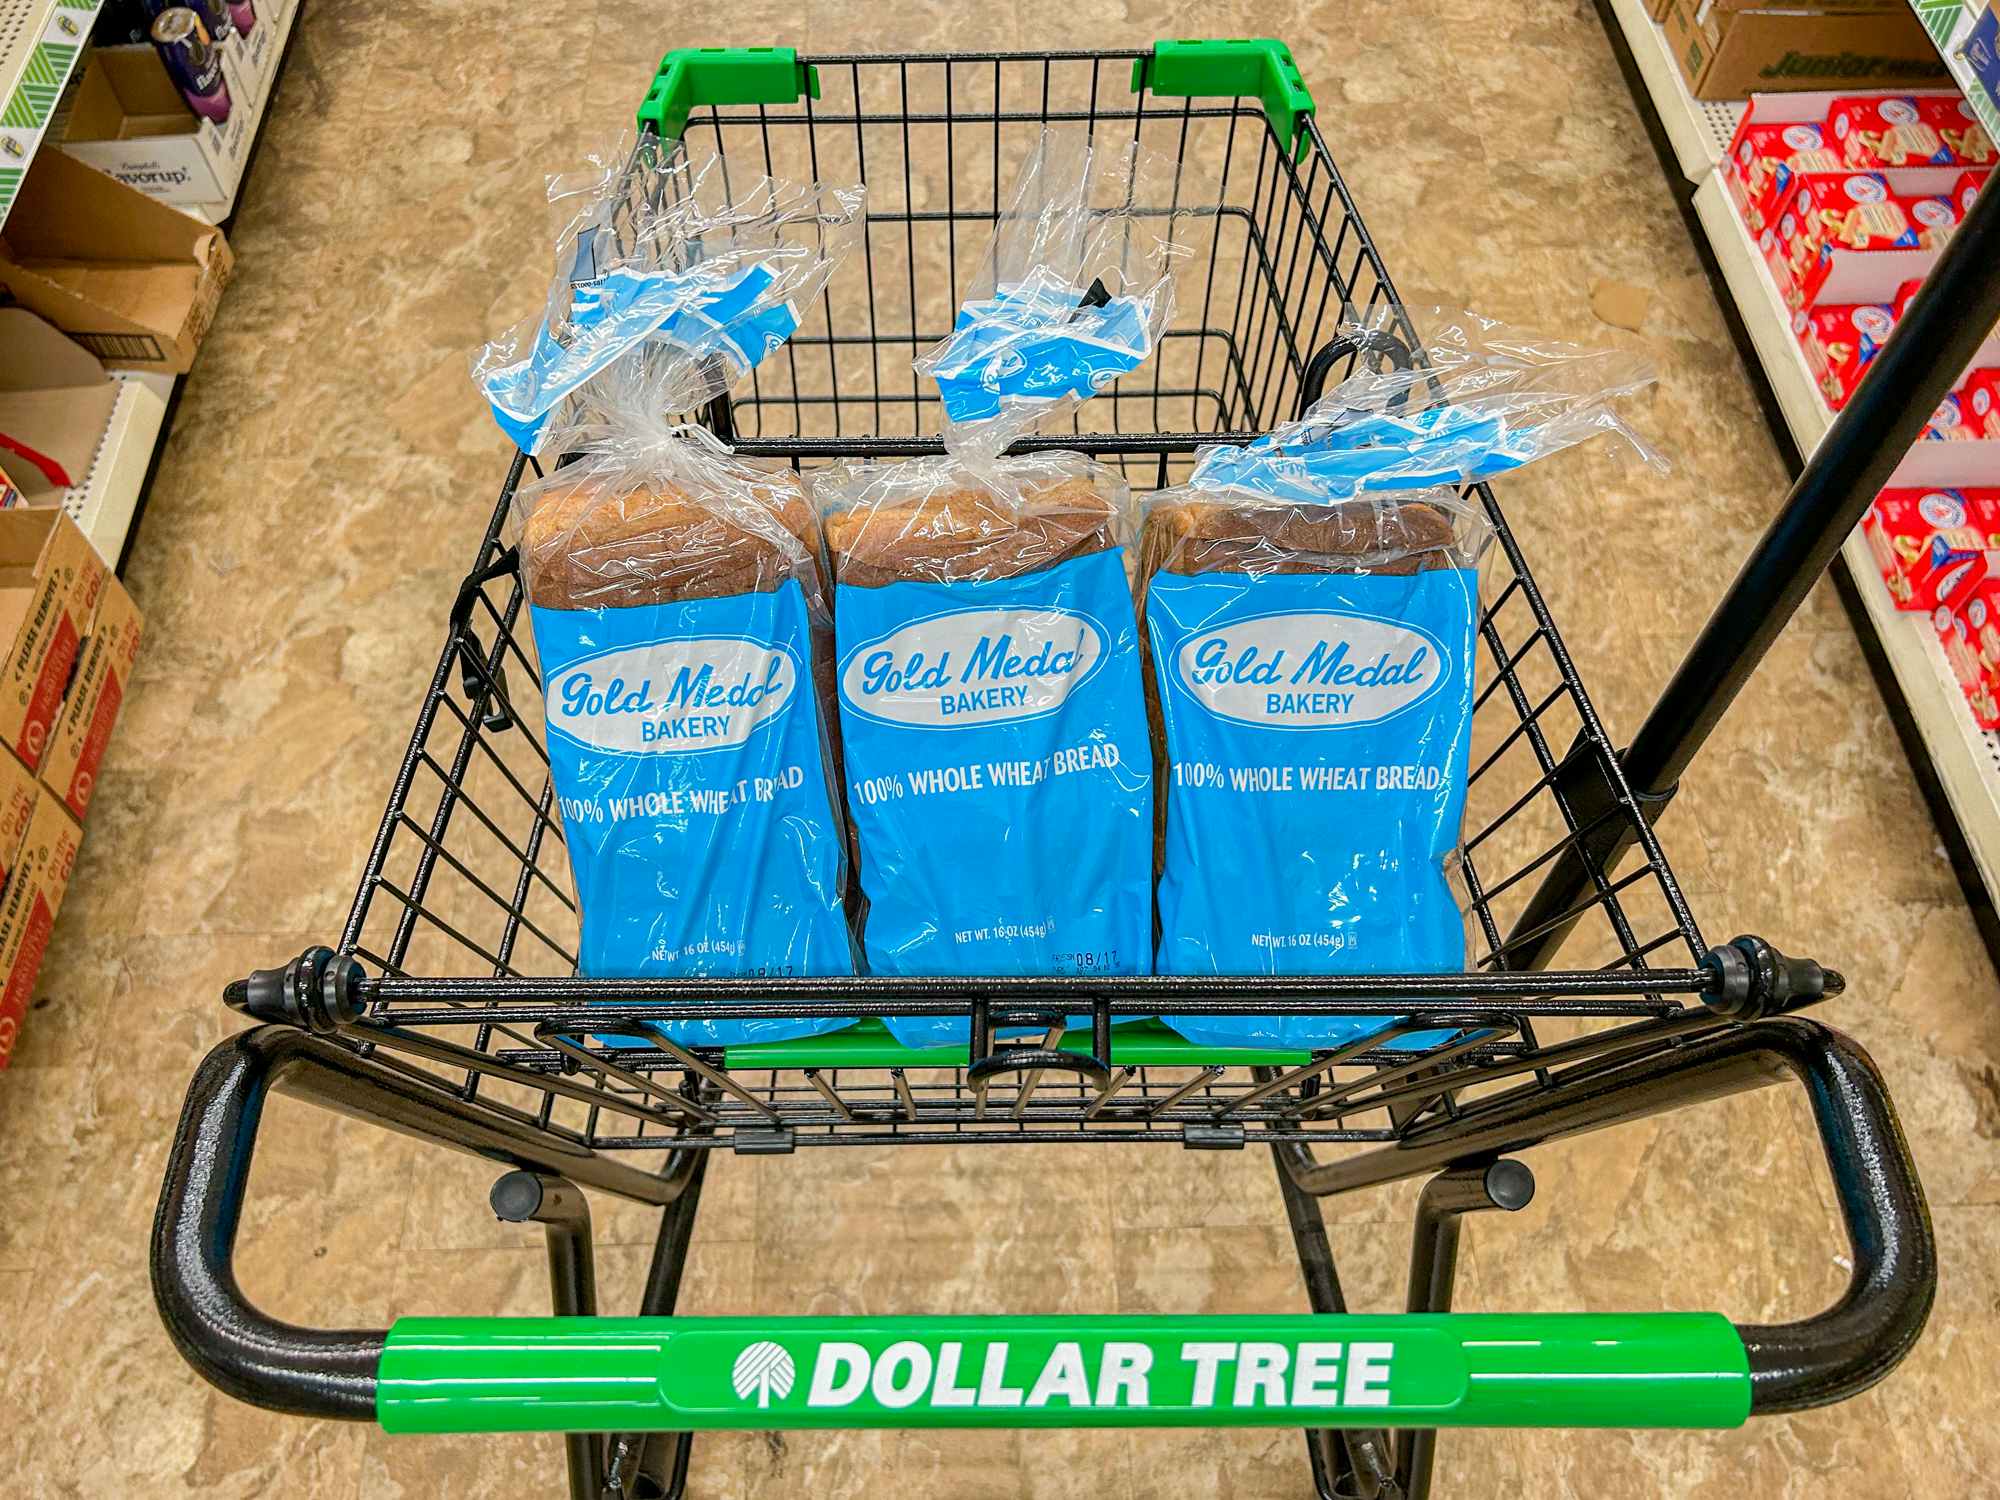 15 Dollar Store Deals You Should Always Buy (& 5 to Avoid!)